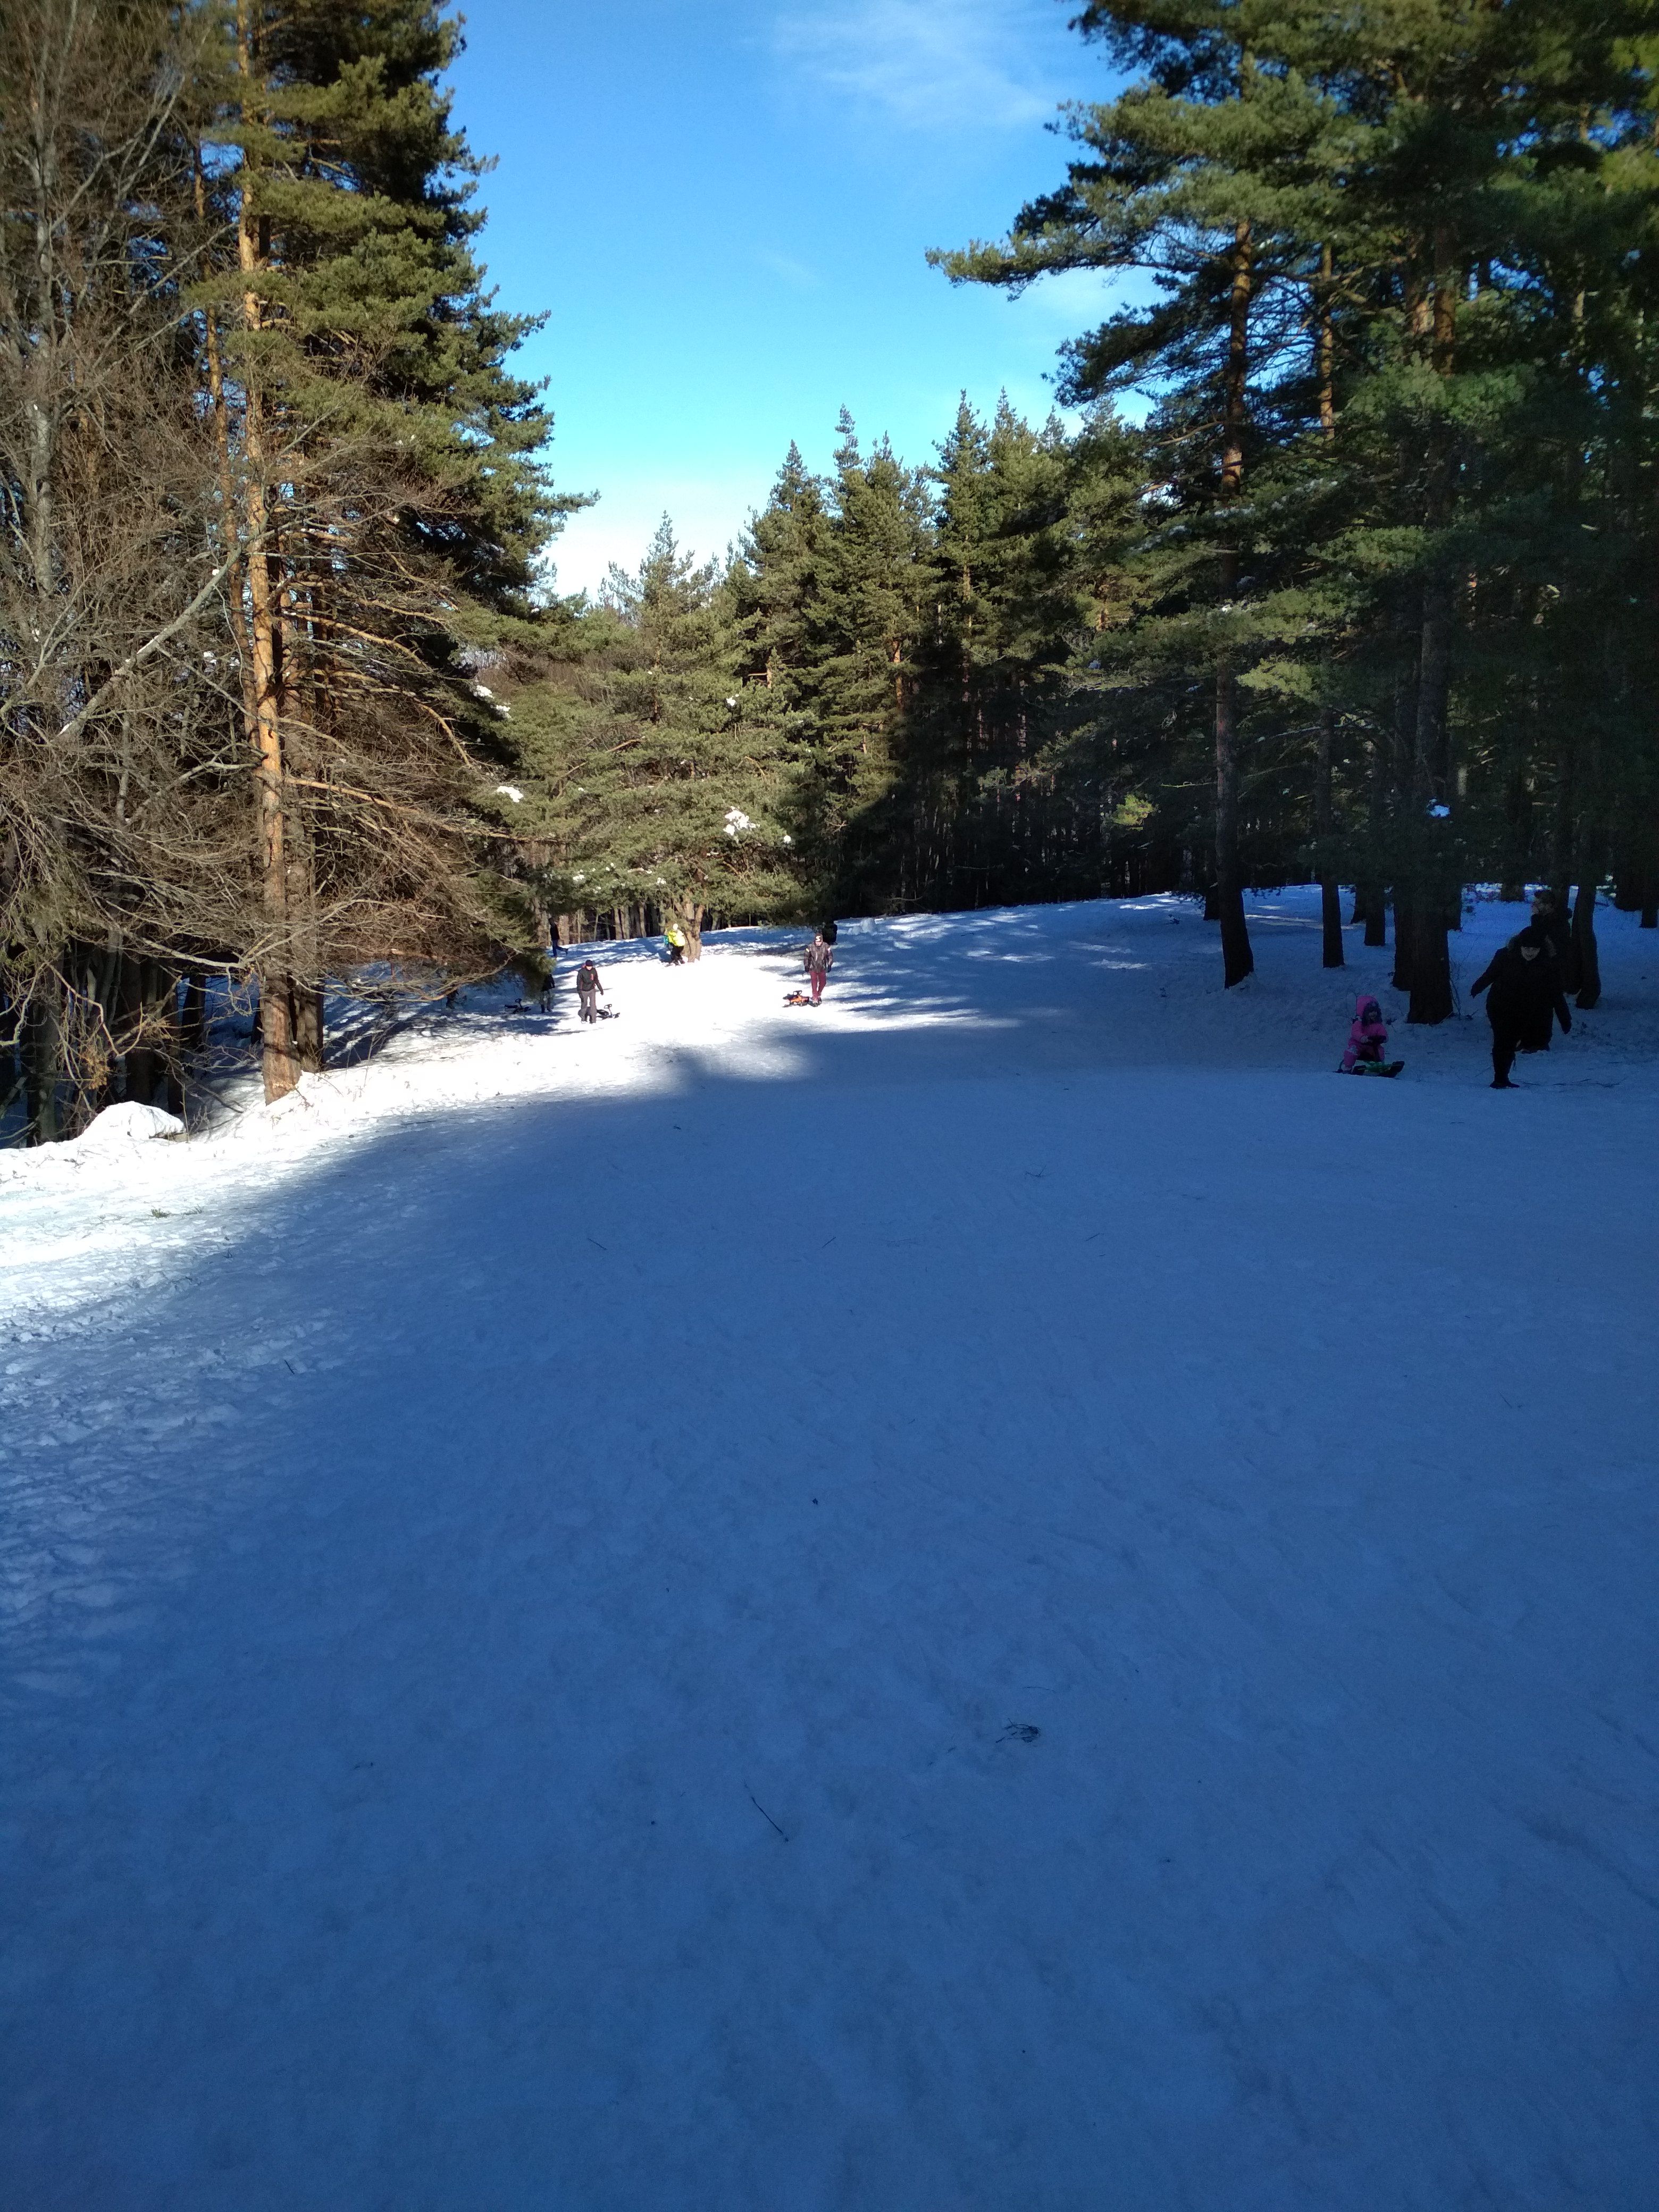 Caption: A photo of a snowy field, surrounded by tall pine trees. There are people sliding down the hill. (Local Guide @DeniGu)